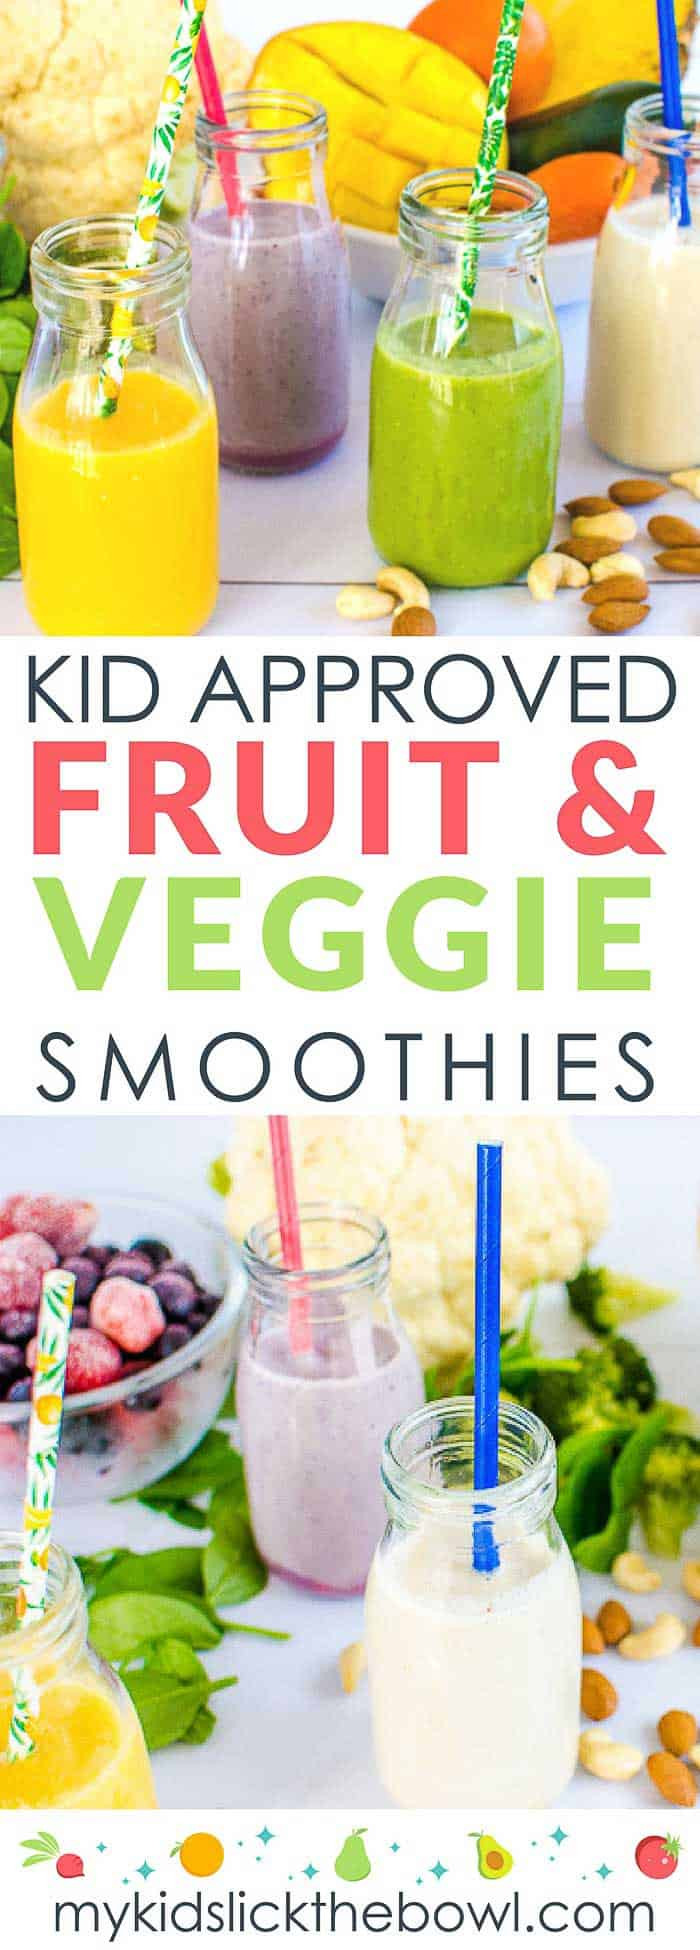 Healthy Smoothies For Kids With Veggies
 Fruit and Veggie Smoothies For Kids